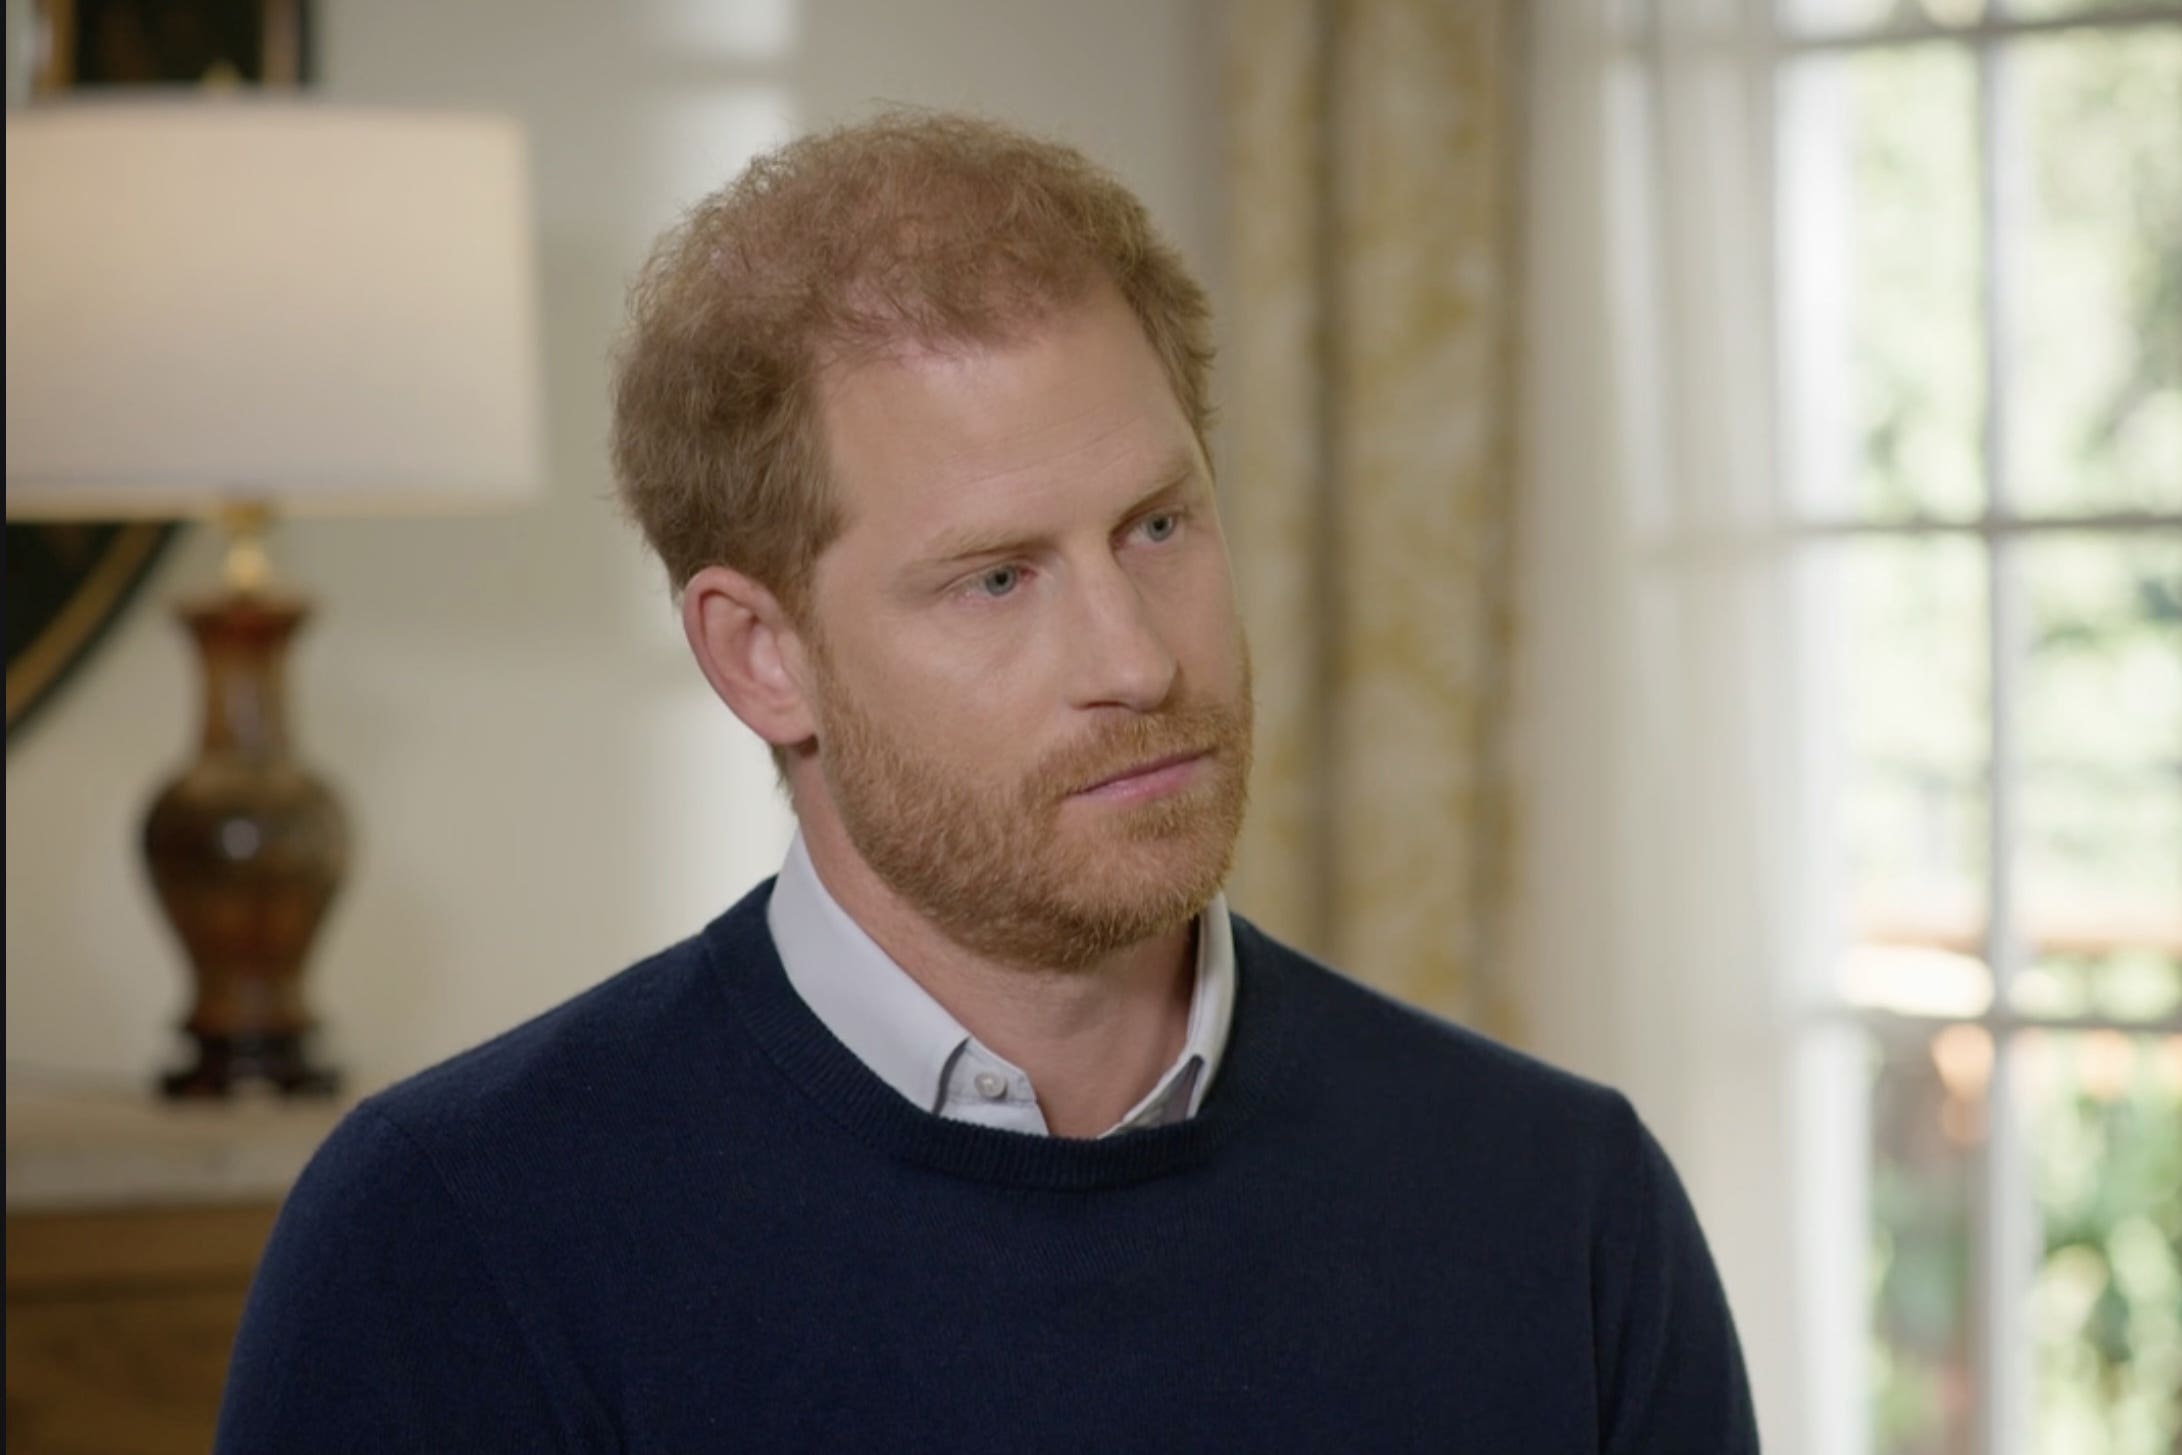 The Duke of Sussex claimed the Queen Consort ‘sacrificed me on her personal PR altar’, in the latest interview to promote his controversial memoir, Spare (ITV/PA)